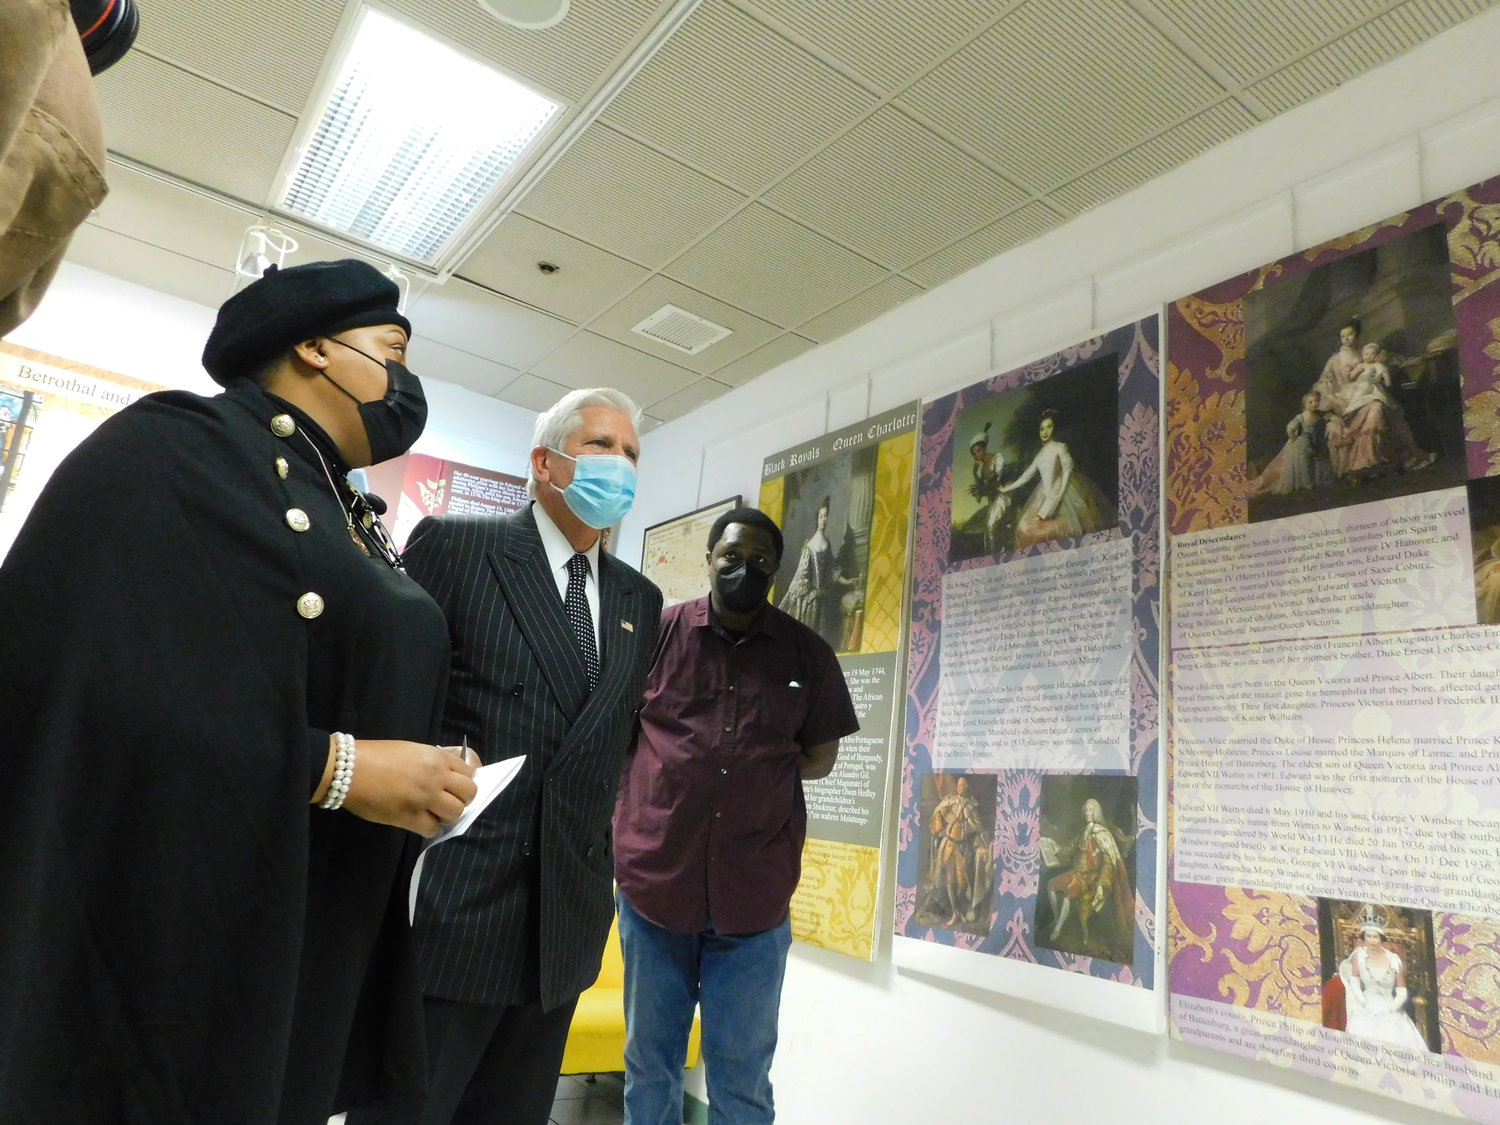 Monet Green, left, and Anthony Richards, right, showed County Executive Bruce Blakeman a display in the Royals Room of the Joysetta and Julius Pearse African American Museum of Nassau County on Jan. 17, Martin Luther King Jr. Day.